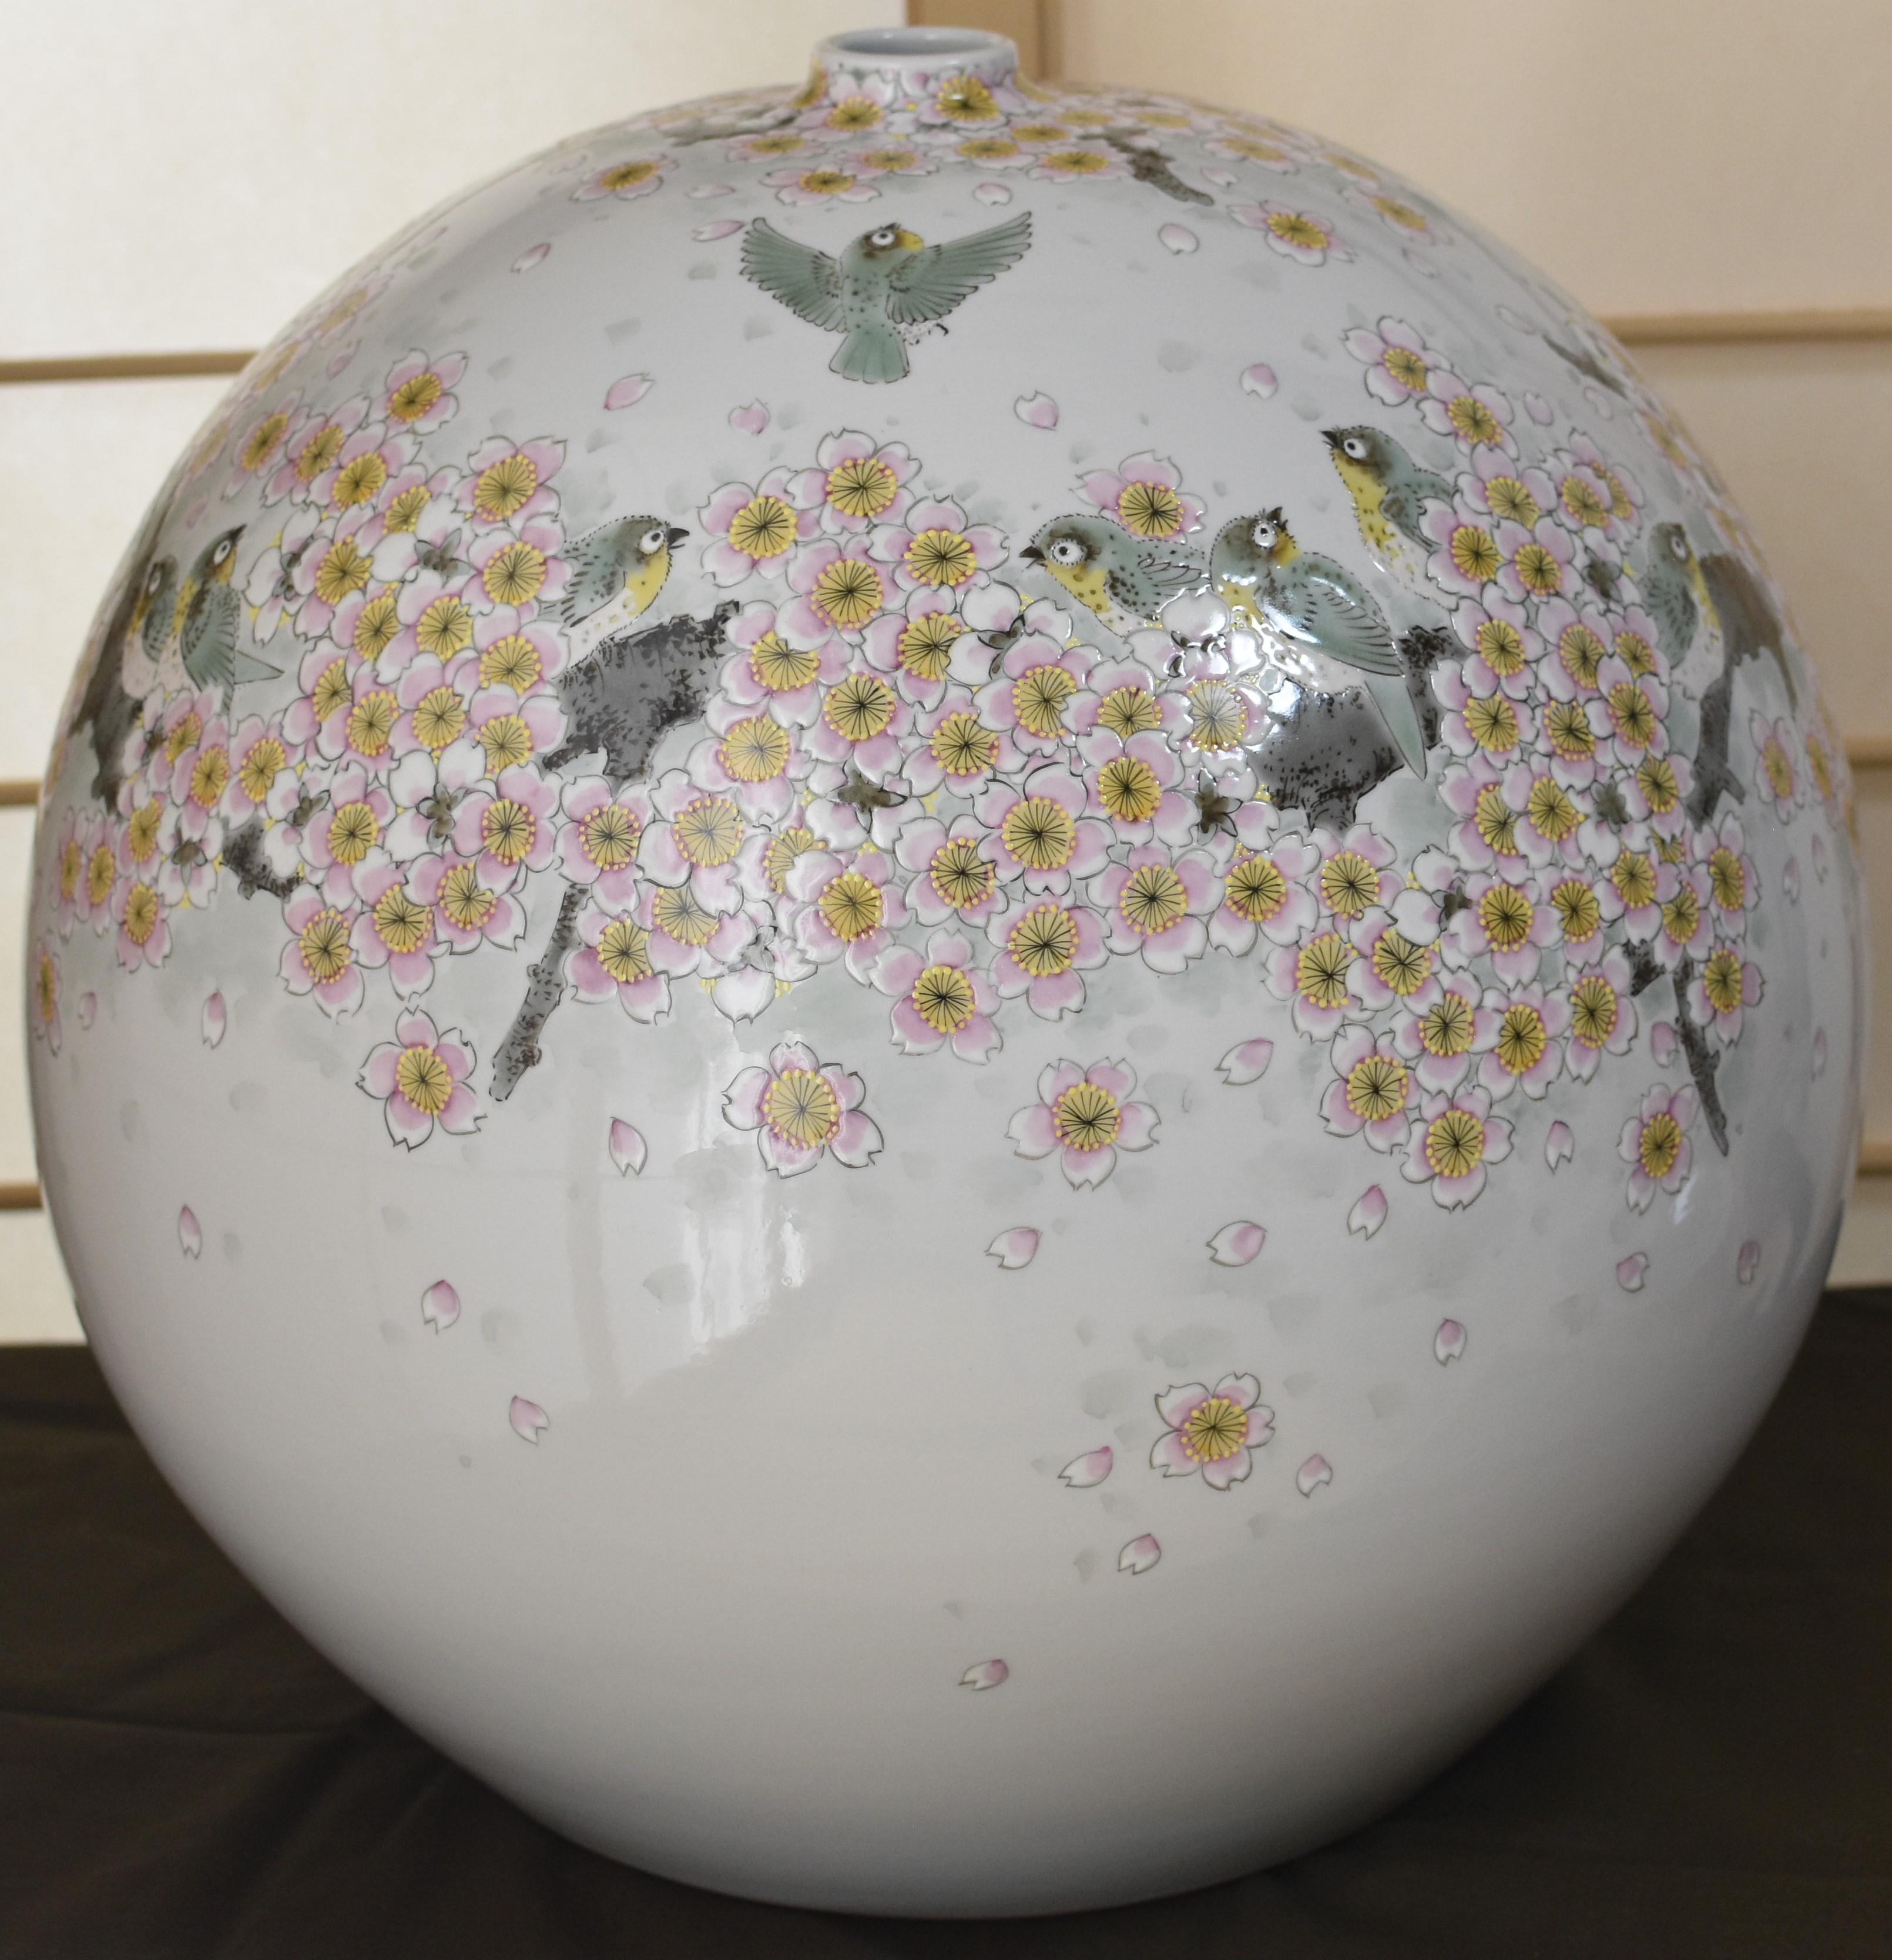 Extraordinary large contemporary Japanese decorative porcelain vase, intricately hand painted in beautiful cream, pink and green, creating a stunning two wide band of cherry blossoms in soft pink and graceful birds decorating the center and rim of